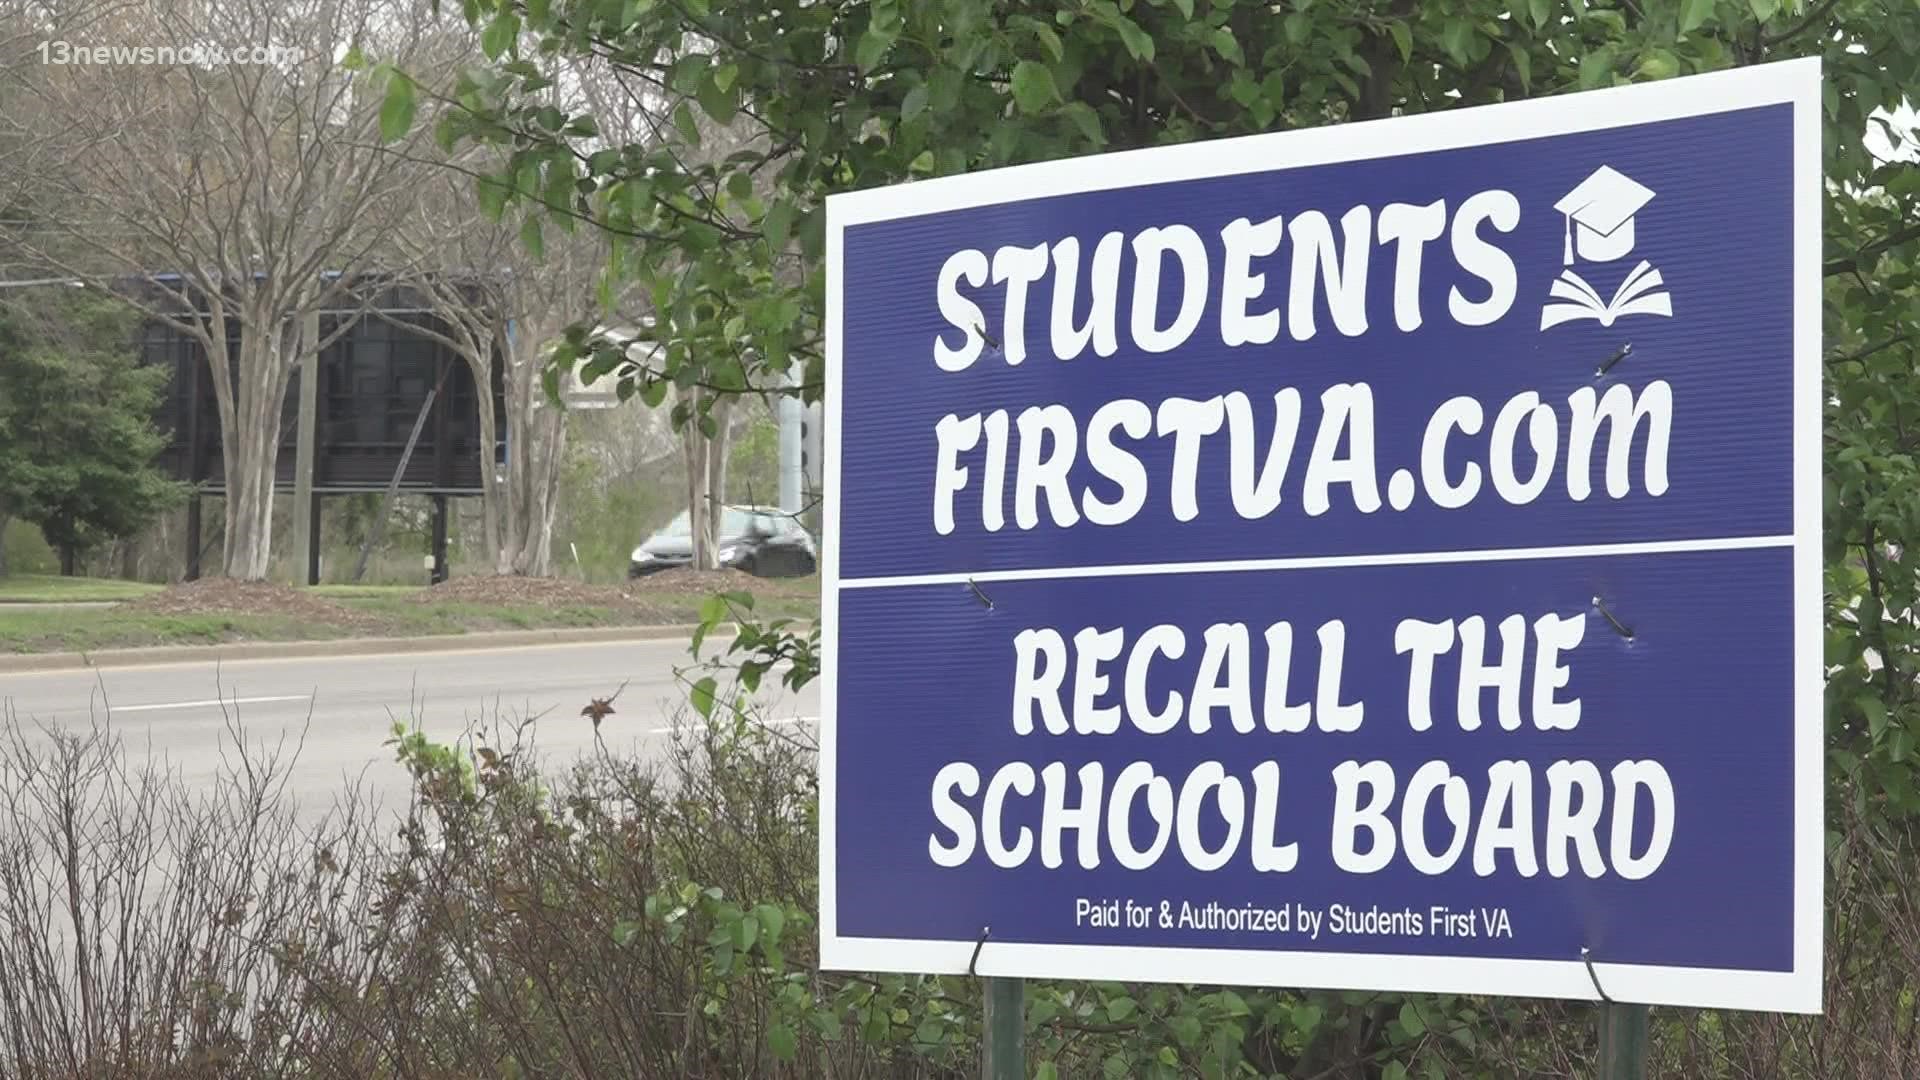 A group of parents created several petitions asking to recall certain Virginia Beach School Board members.